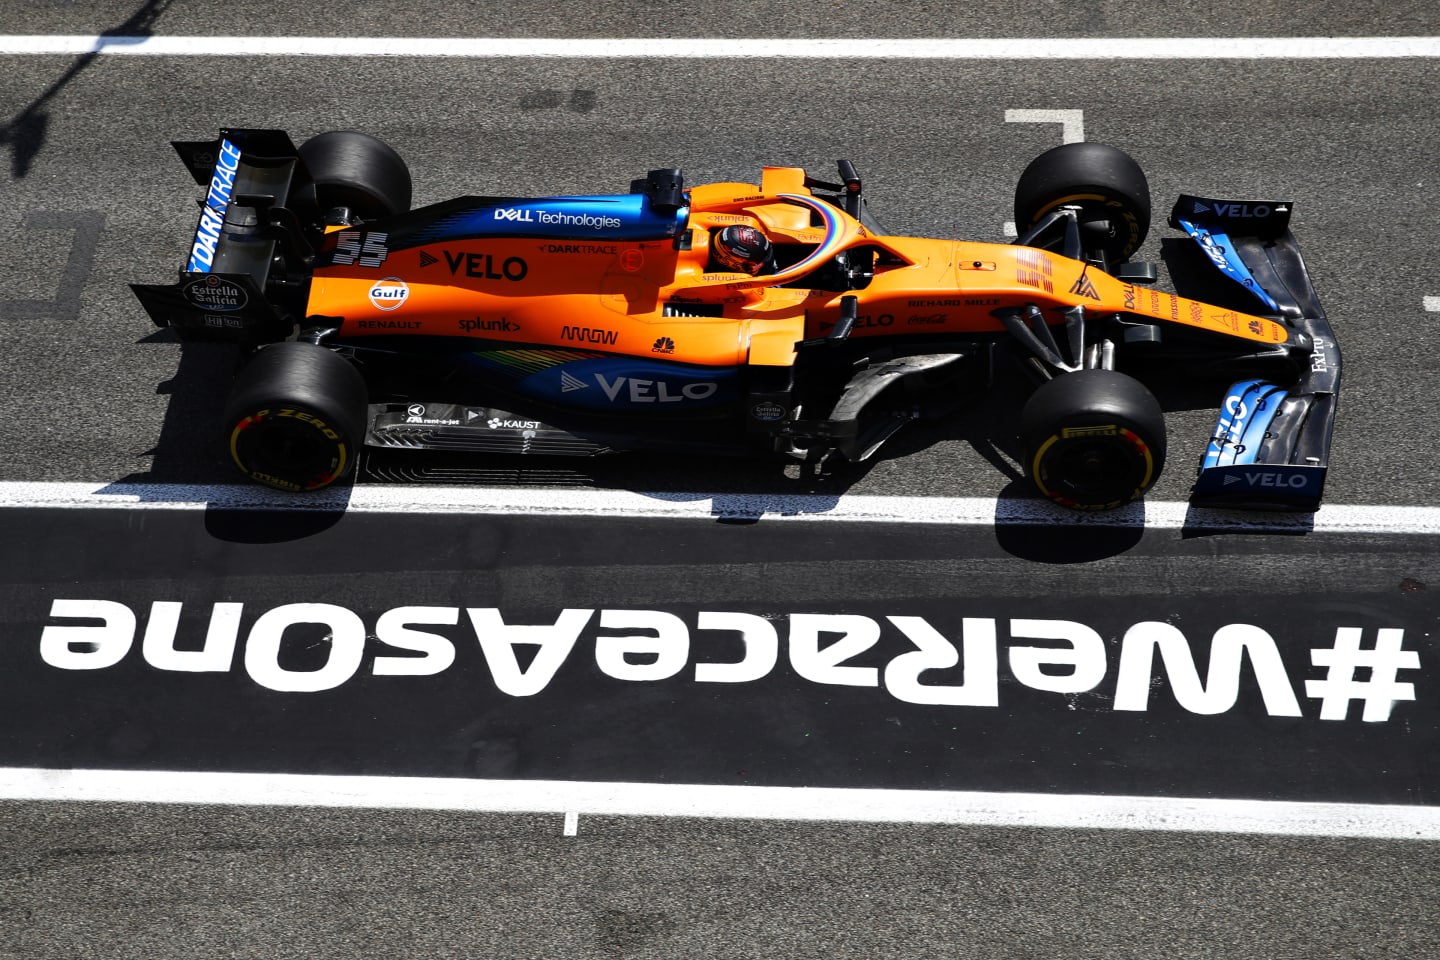 BARCELONA, SPAIN - AUGUST 15: Carlos Sainz of Spain driving the (55) McLaren F1 Team MCL35 Renault in the pit lane during final practice for the F1 Grand Prix of Spain at Circuit de Barcelona-Catalunya on August 15, 2020 in Barcelona, Spain. (Photo by Mark Thompson/Getty Images)